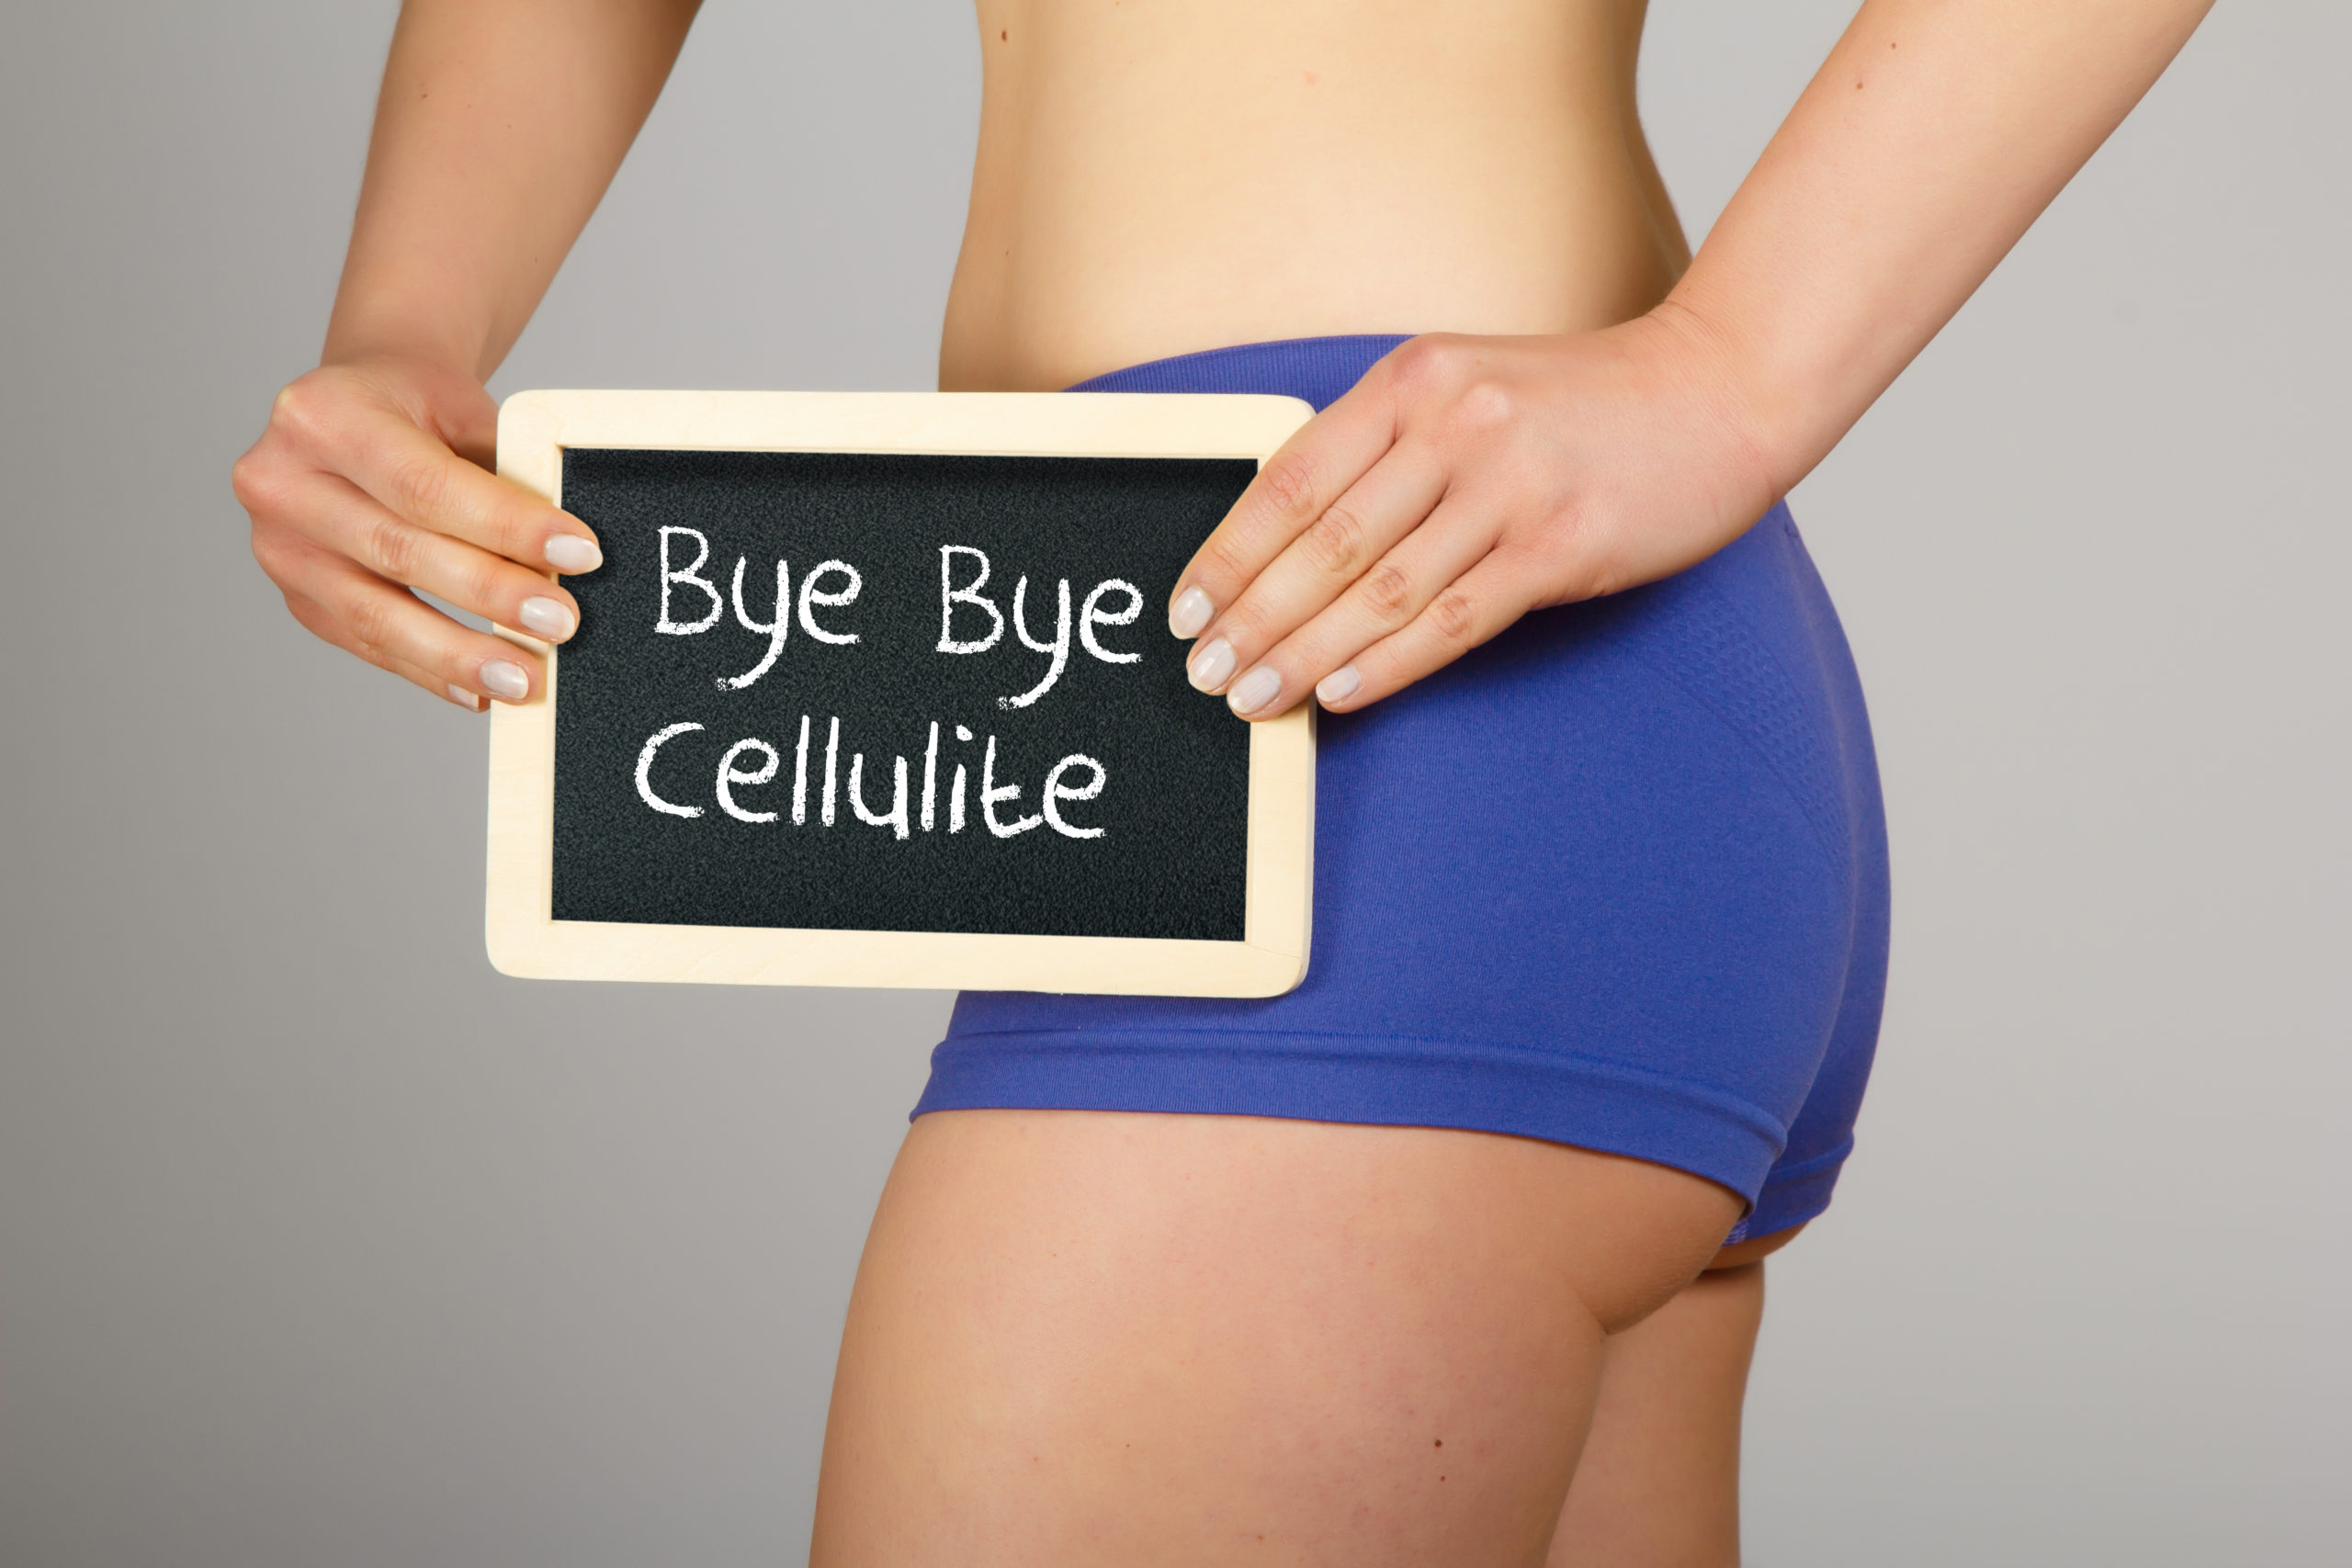 Has Anyone Tried QWO, The New Injectable To Reduce Cellulite